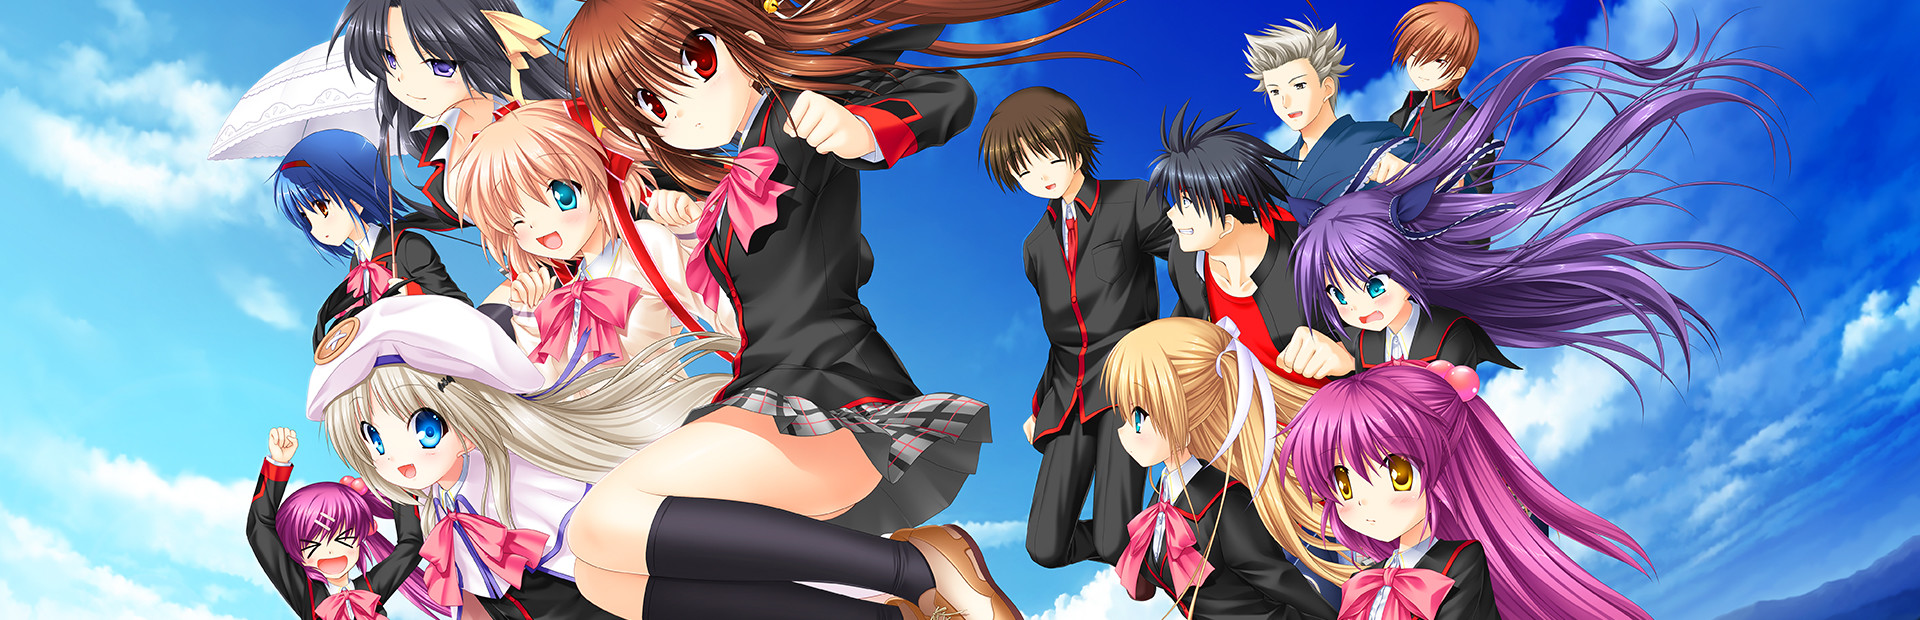 Little Busters! English Edition cover image